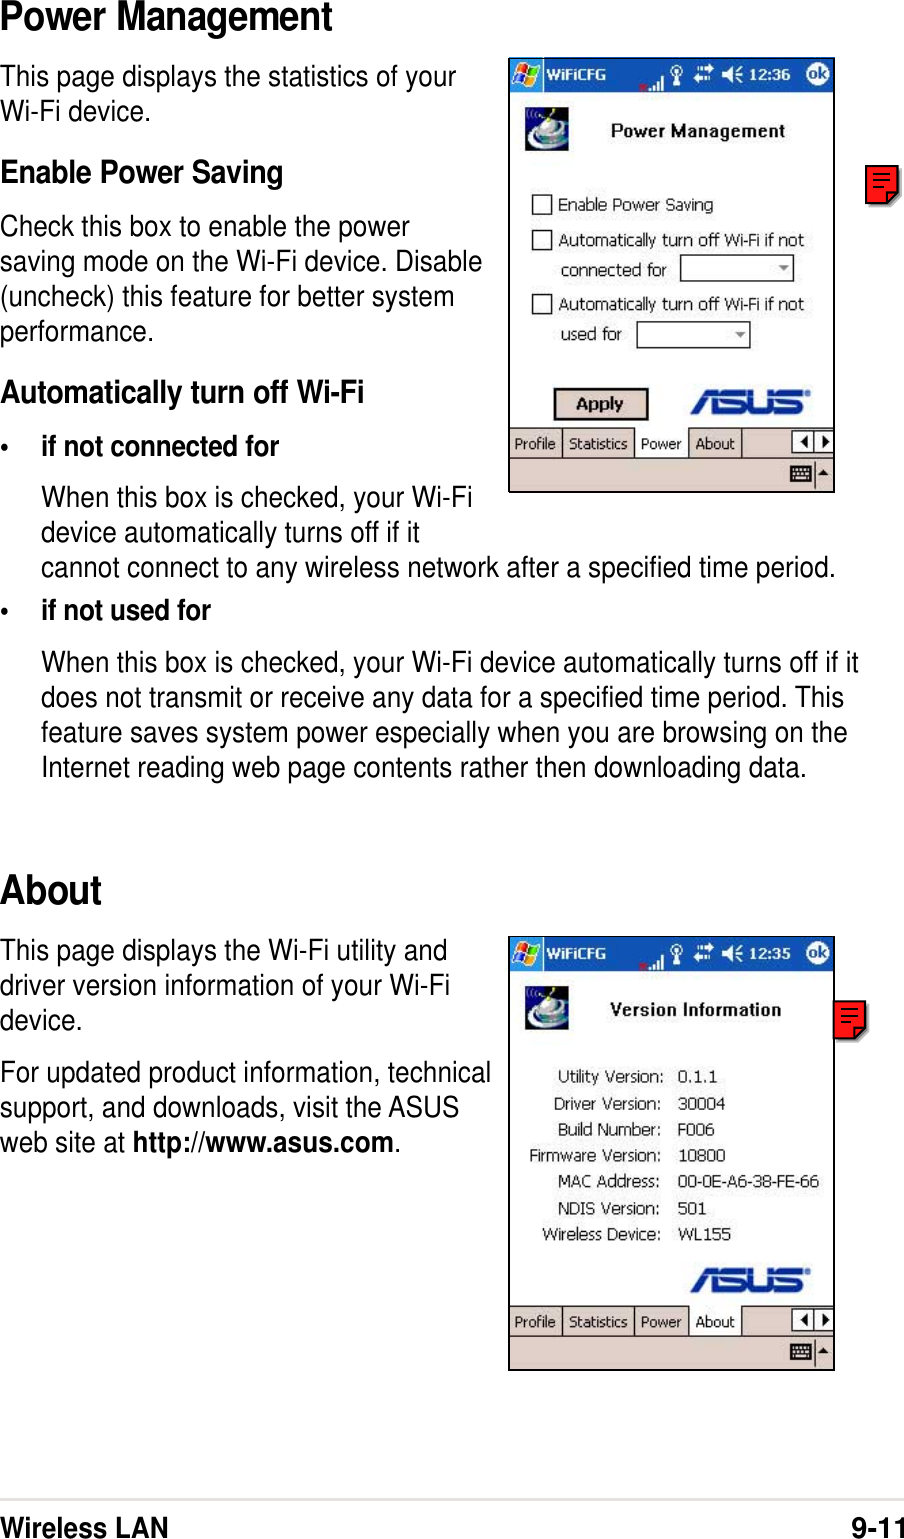 Wireless LAN9-11Power ManagementThis page displays the statistics of yourWi-Fi device.Enable Power SavingCheck this box to enable the powersaving mode on the Wi-Fi device. Disable(uncheck) this feature for better systemperformance.Automatically turn off Wi-Fi•if not connected forWhen this box is checked, your Wi-Fidevice automatically turns off if itcannot connect to any wireless network after a specified time period.•if not used forWhen this box is checked, your Wi-Fi device automatically turns off if itdoes not transmit or receive any data for a specified time period. Thisfeature saves system power especially when you are browsing on theInternet reading web page contents rather then downloading data.AboutThis page displays the Wi-Fi utility anddriver version information of your Wi-Fidevice.For updated product information, technicalsupport, and downloads, visit the ASUSweb site at http://www.asus.com.